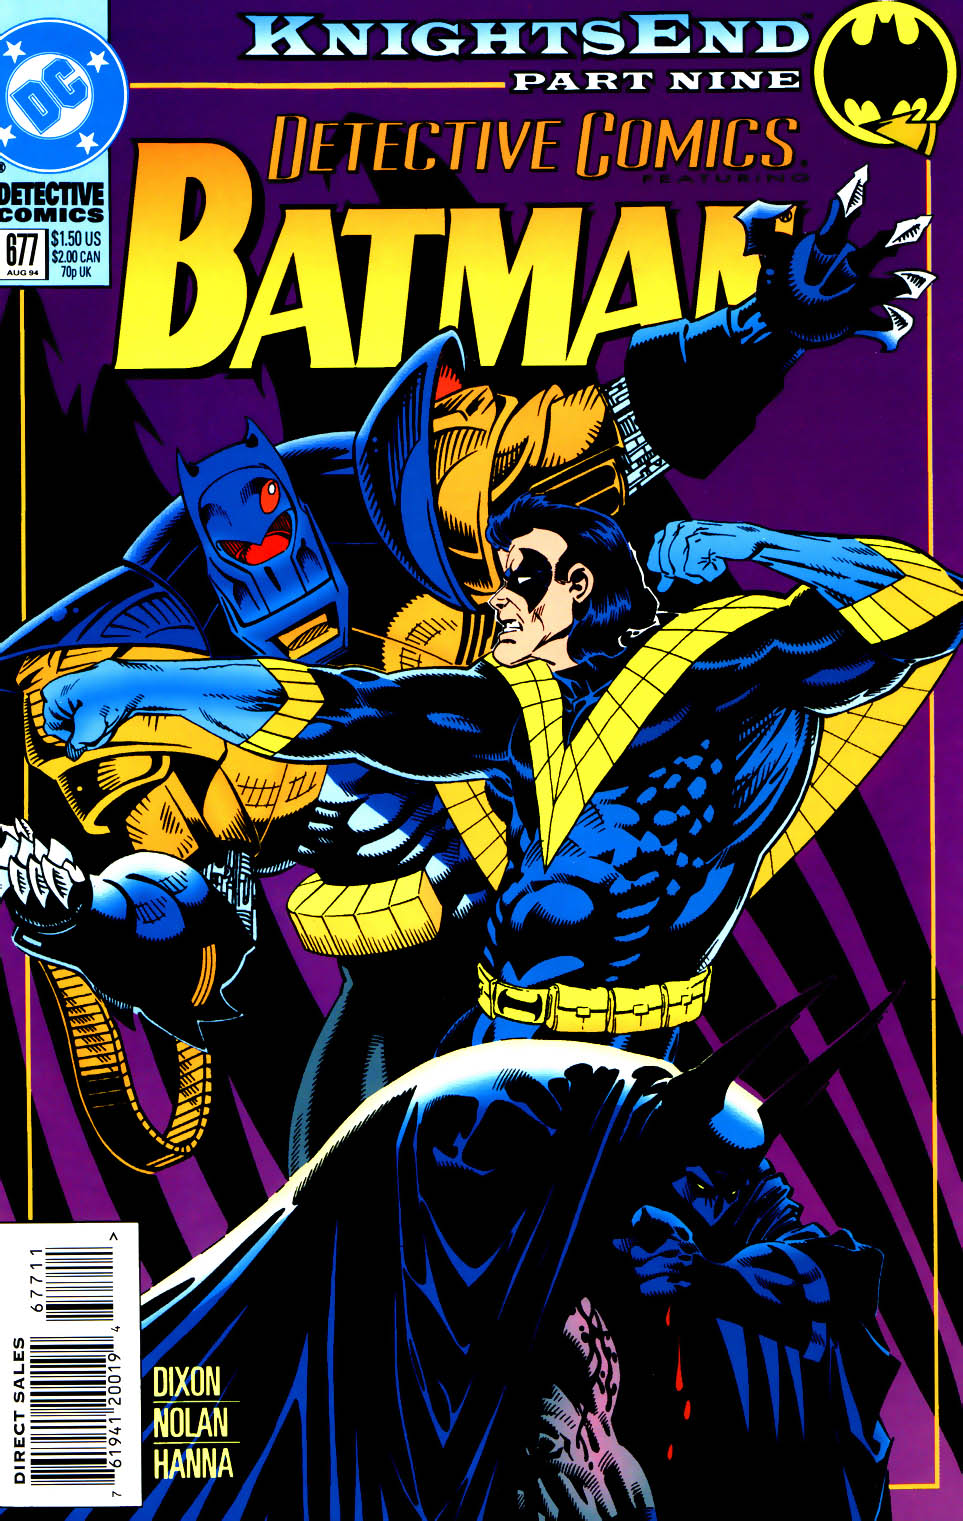 Batman: Knightfall issue Batman: Knightfall KnightsEnd - Issue #9 - Page 1